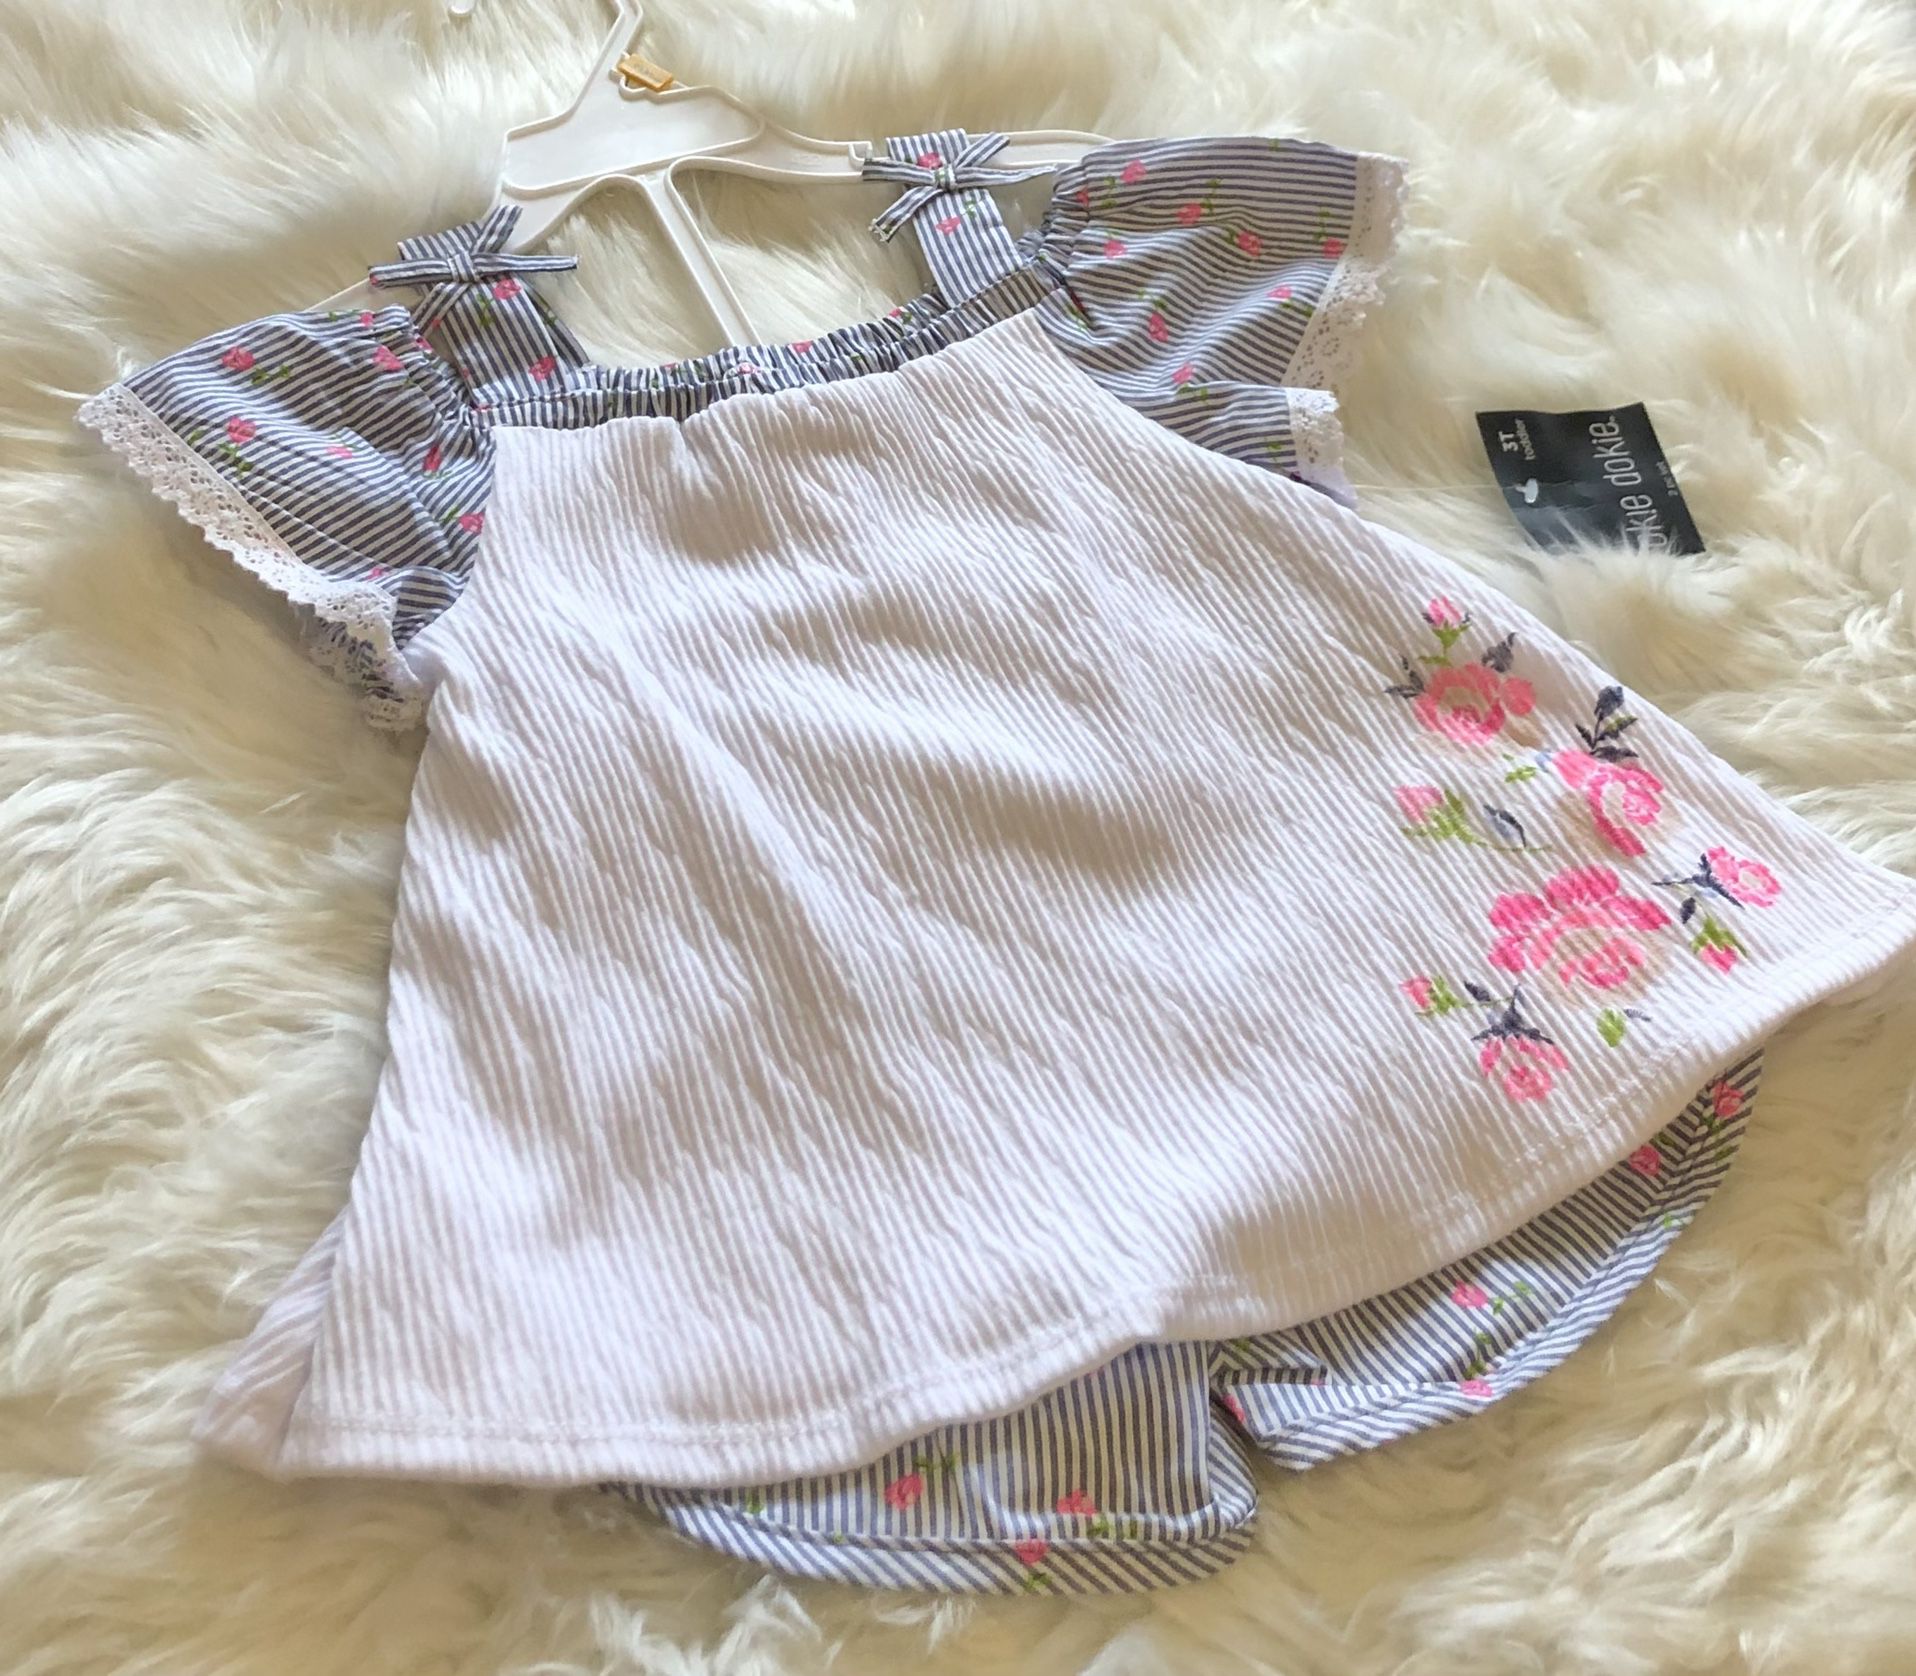 New! Okie Dokie 2PC Toddler Outfit *3T